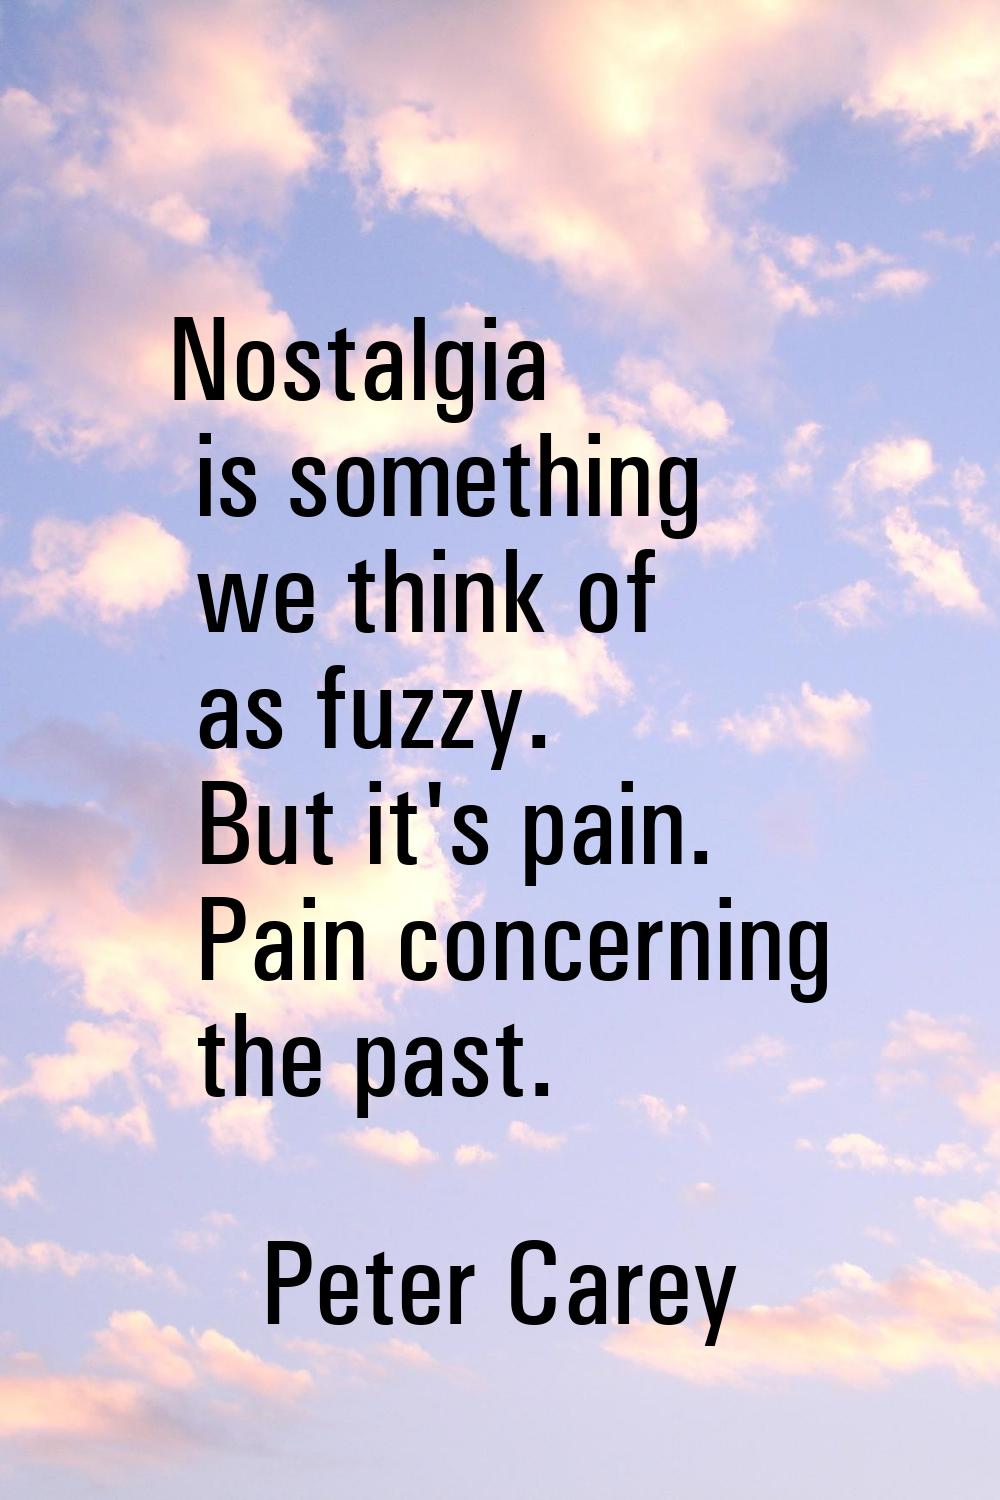 Nostalgia is something we think of as fuzzy. But it's pain. Pain concerning the past.